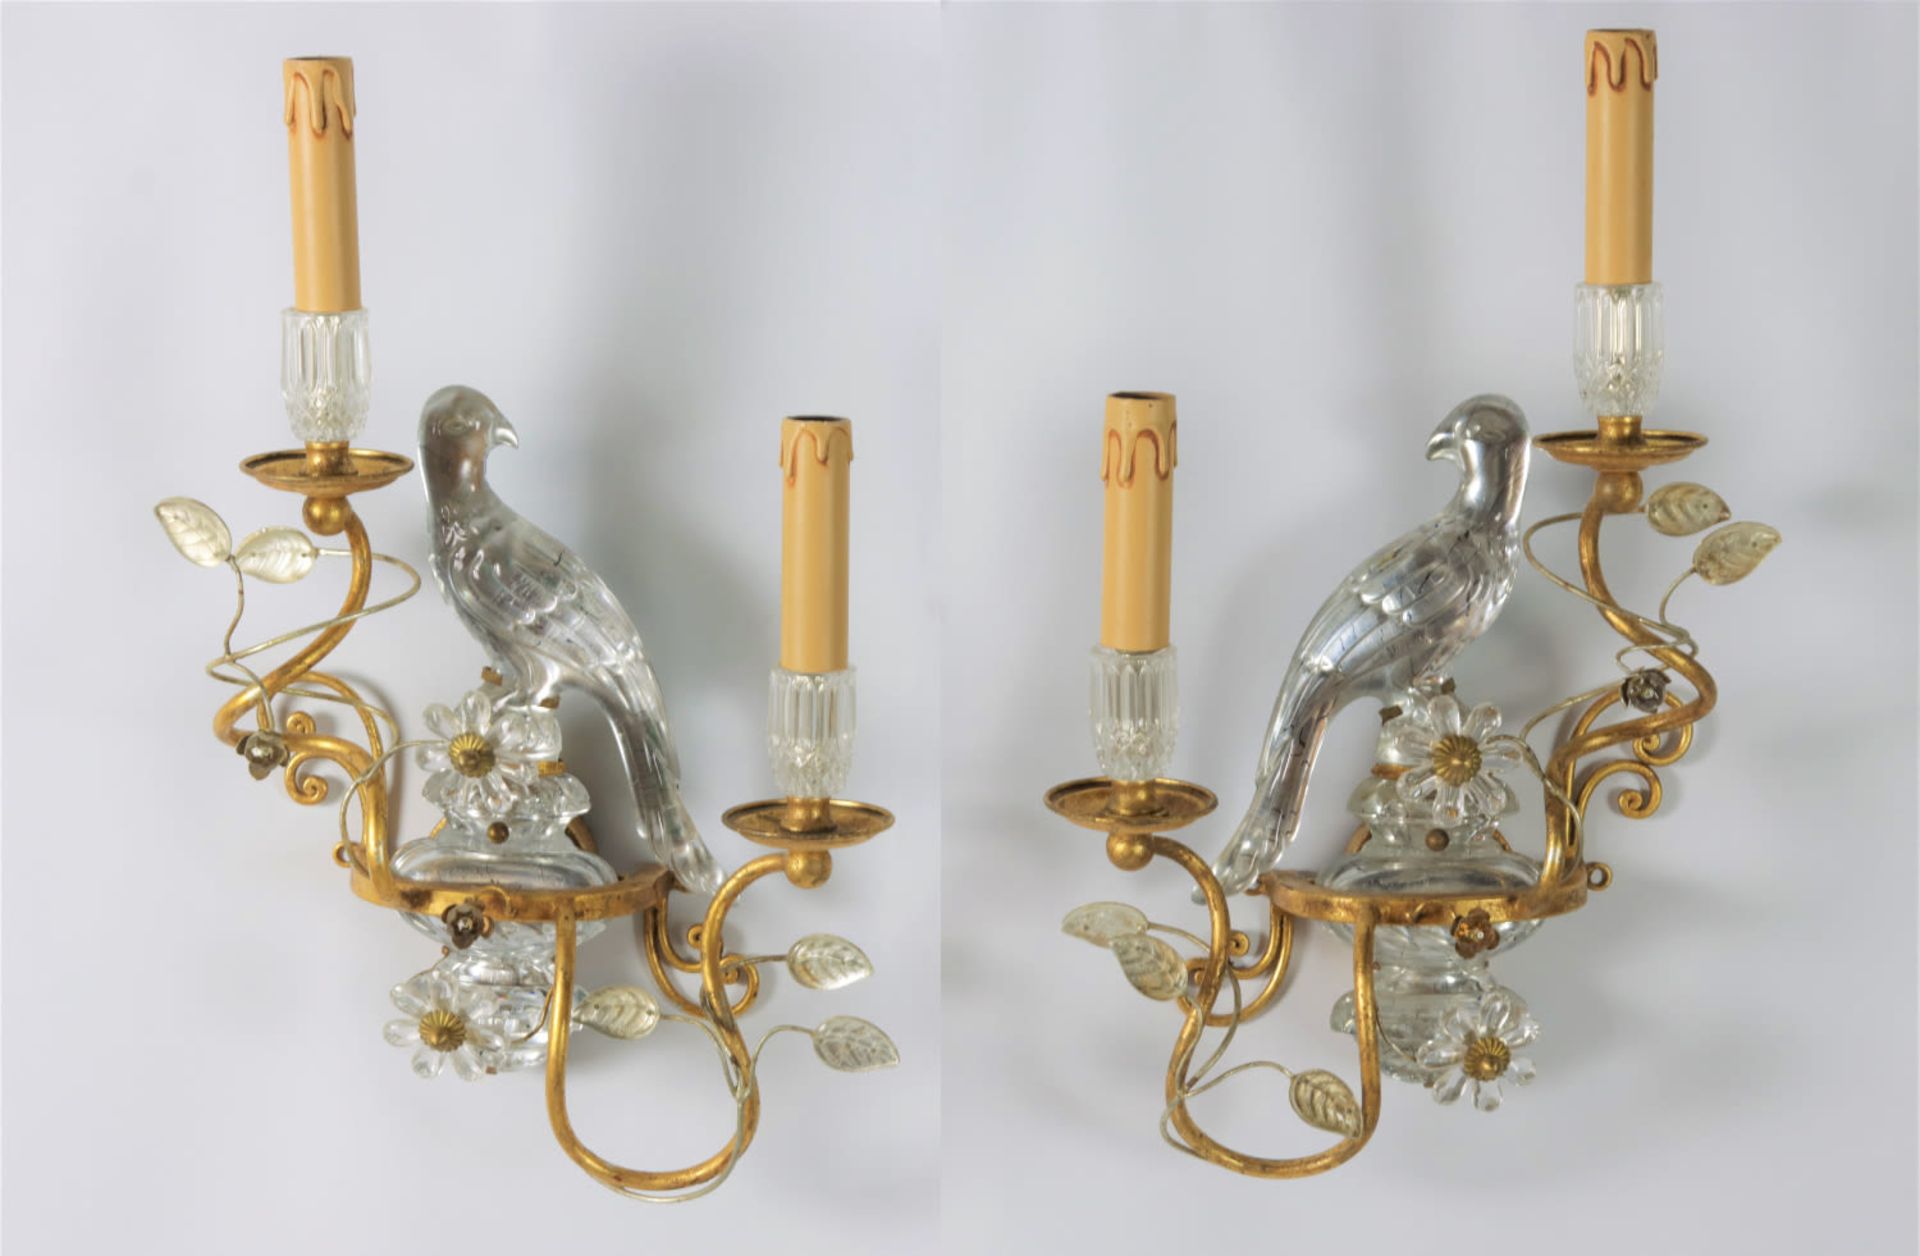 A Pair of crystal and gilt parrot wall lights by Banci Firenze, Mid 20th Century - Image 2 of 4